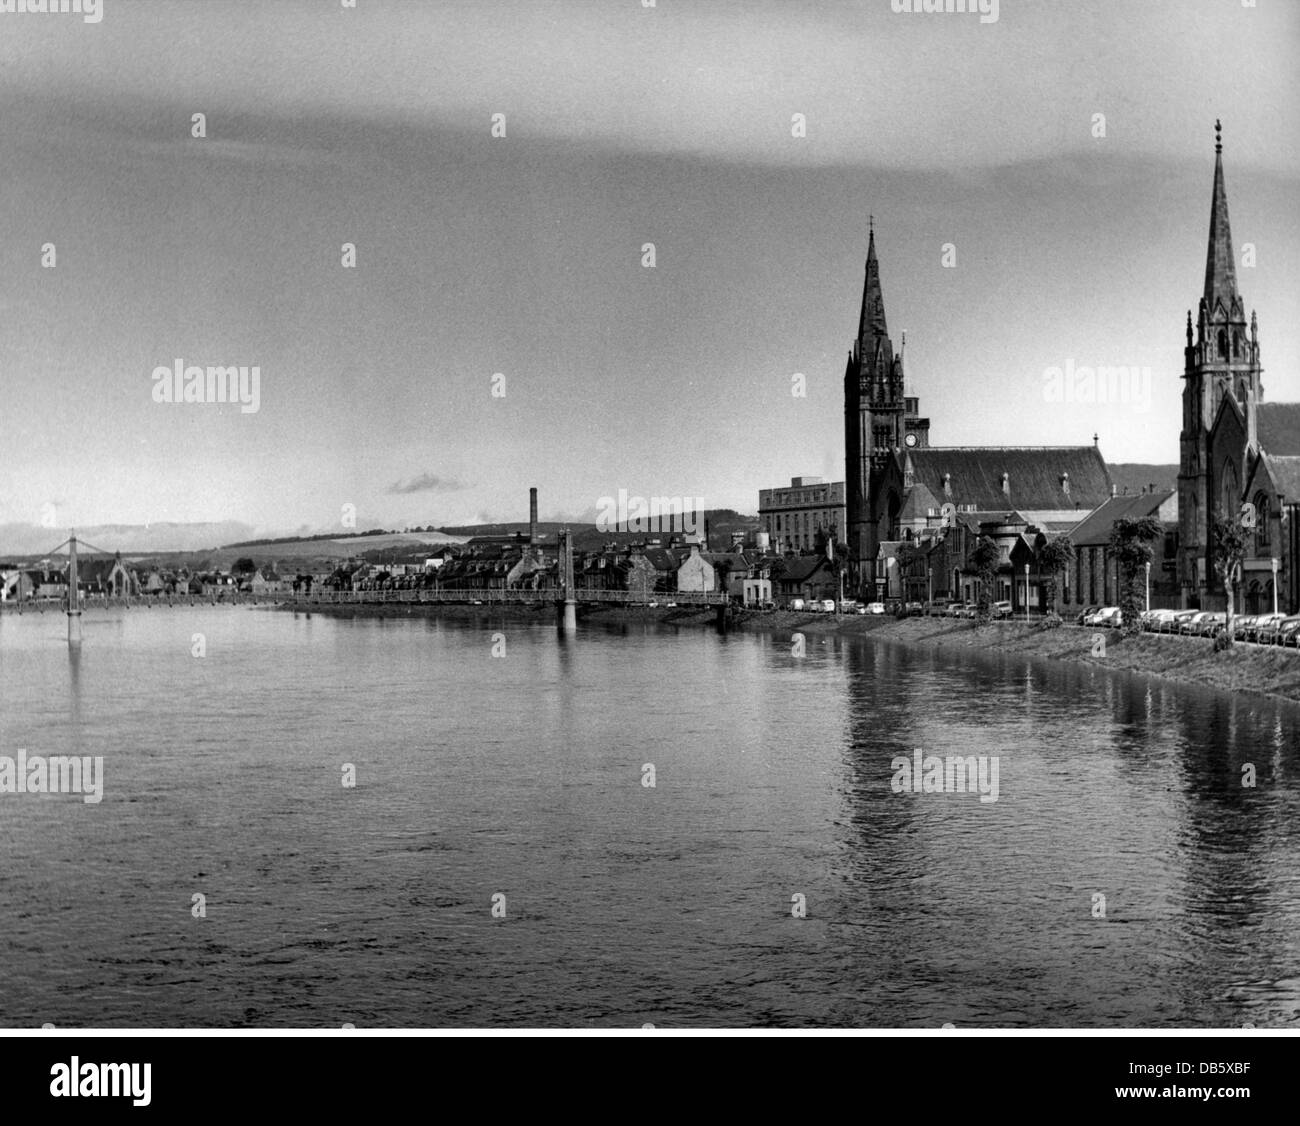 Geographie / Reisen, Großbritannien, Inverness, Stadtblick, um 1960, Additional-Rights-Clearences-not available Stockfoto